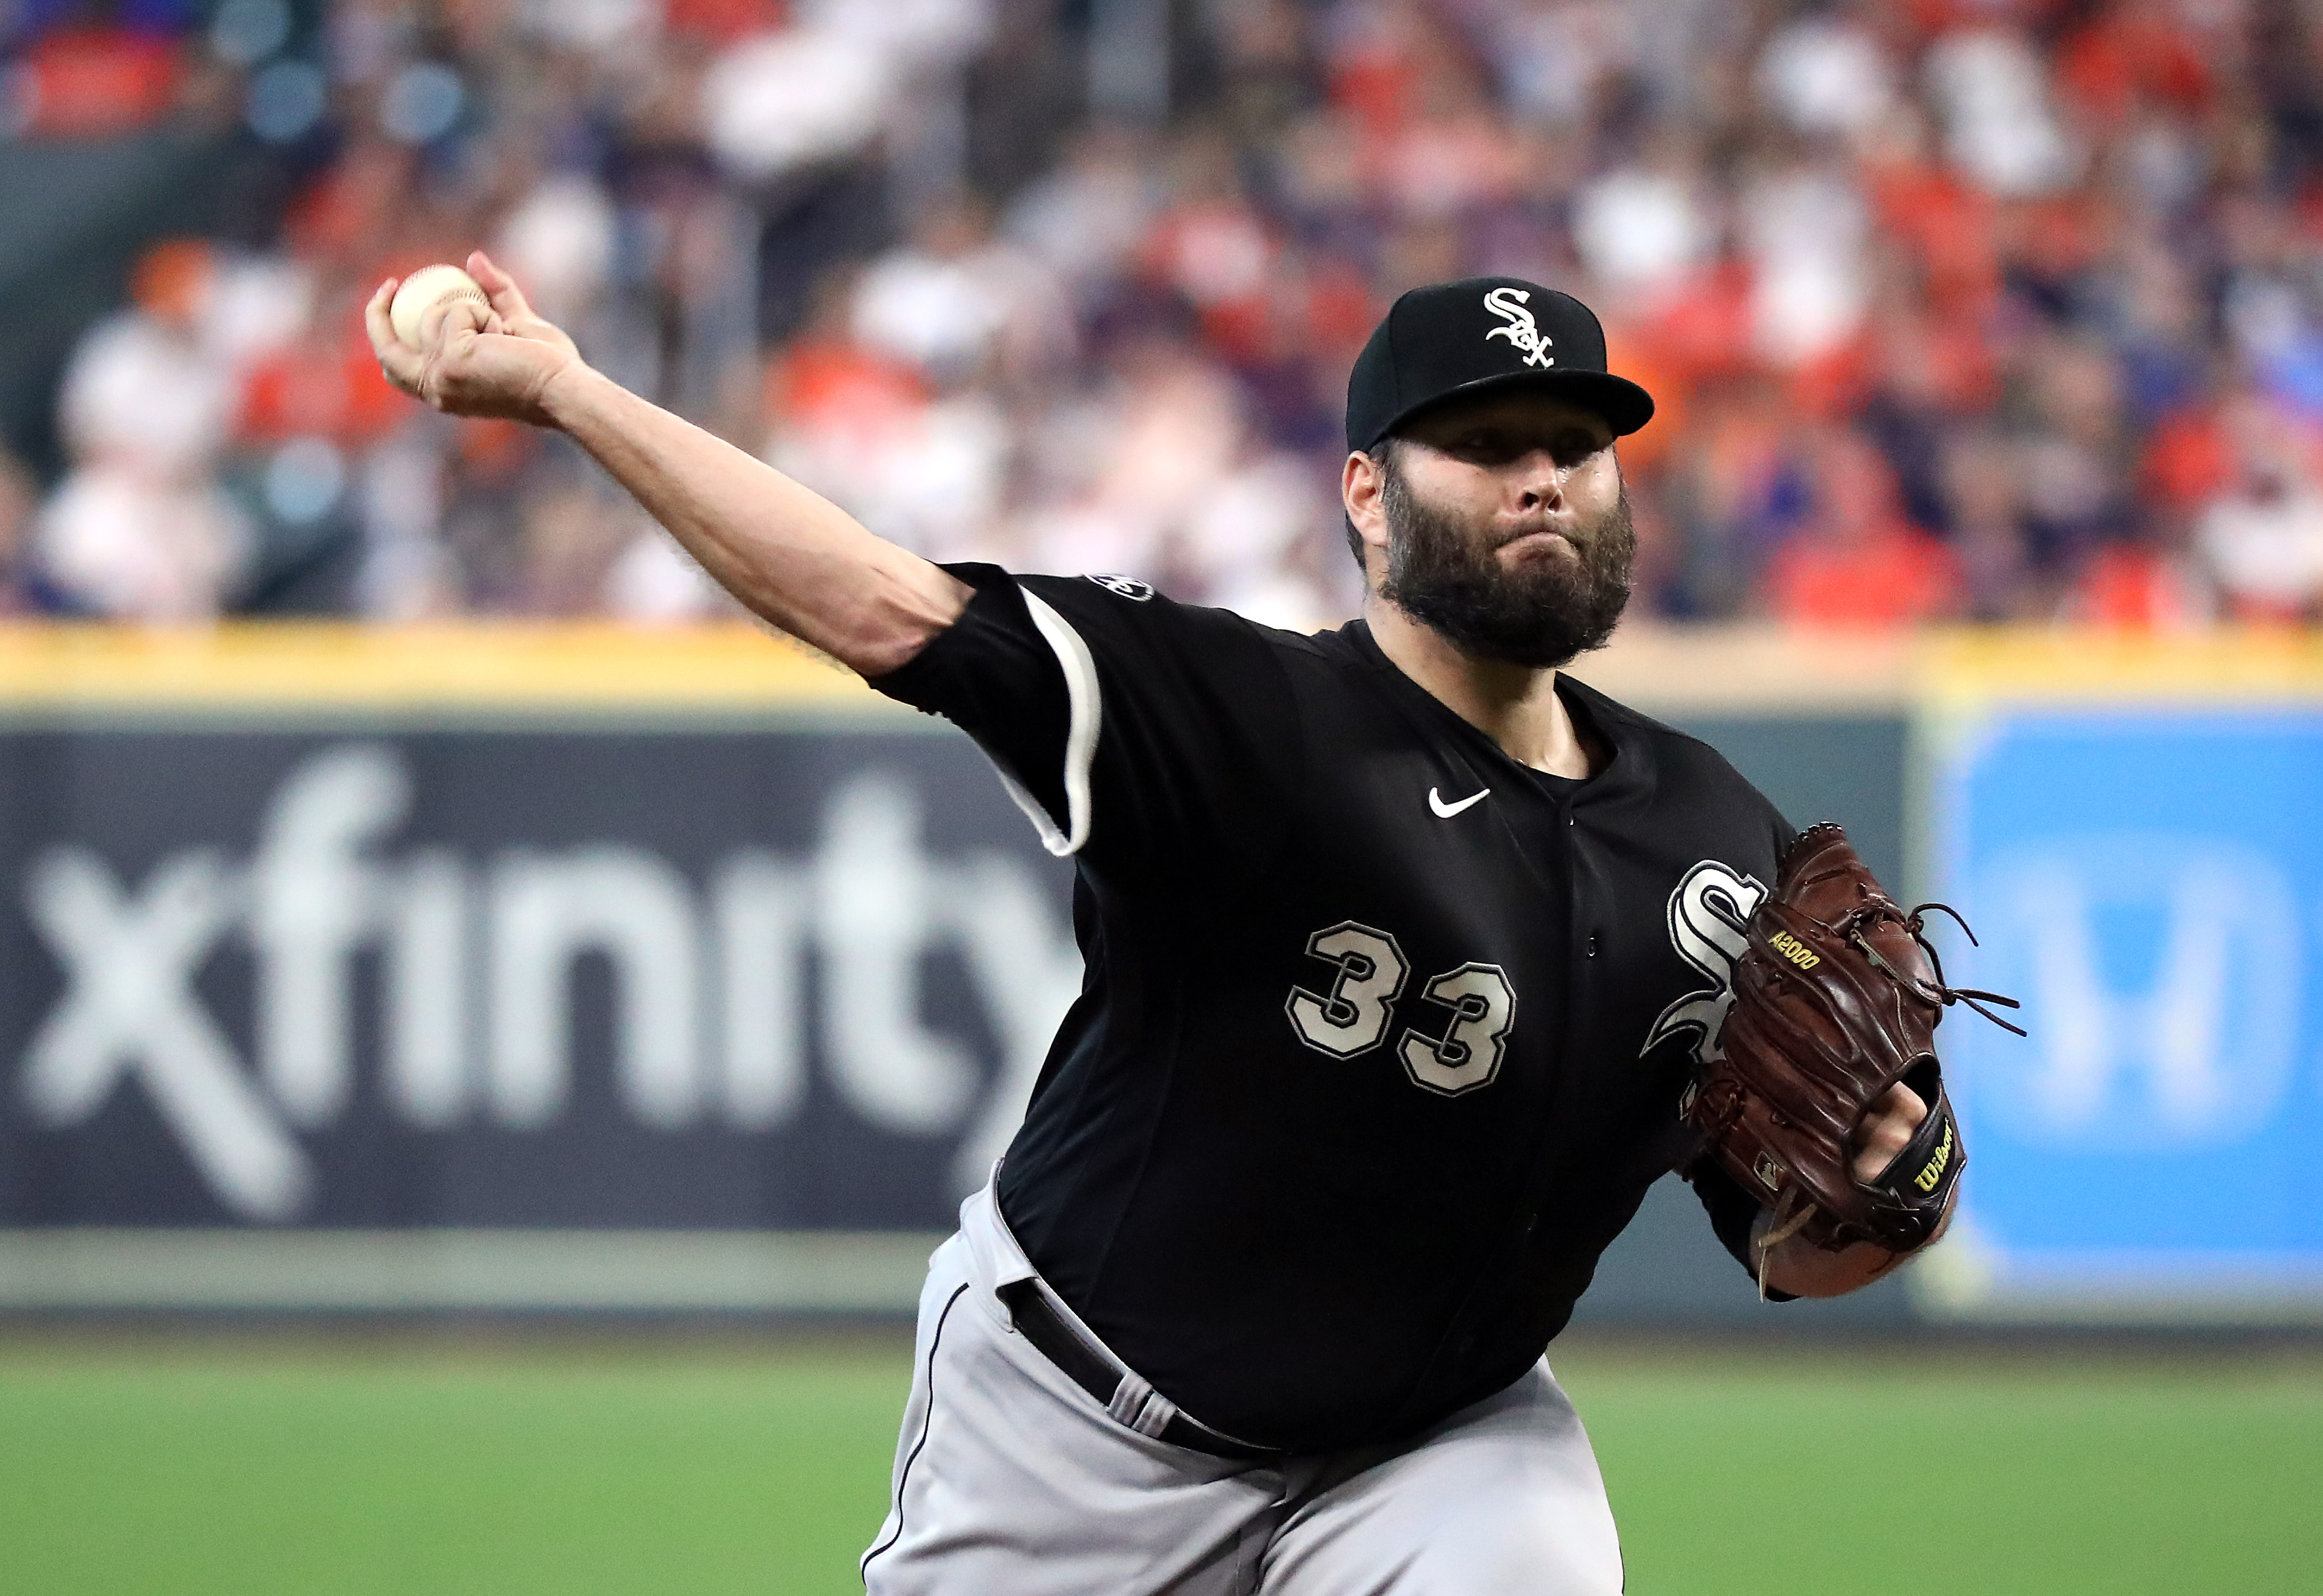 White Sox's Lance Lynn to Miss 4 Weeks with Knee Injury; Will